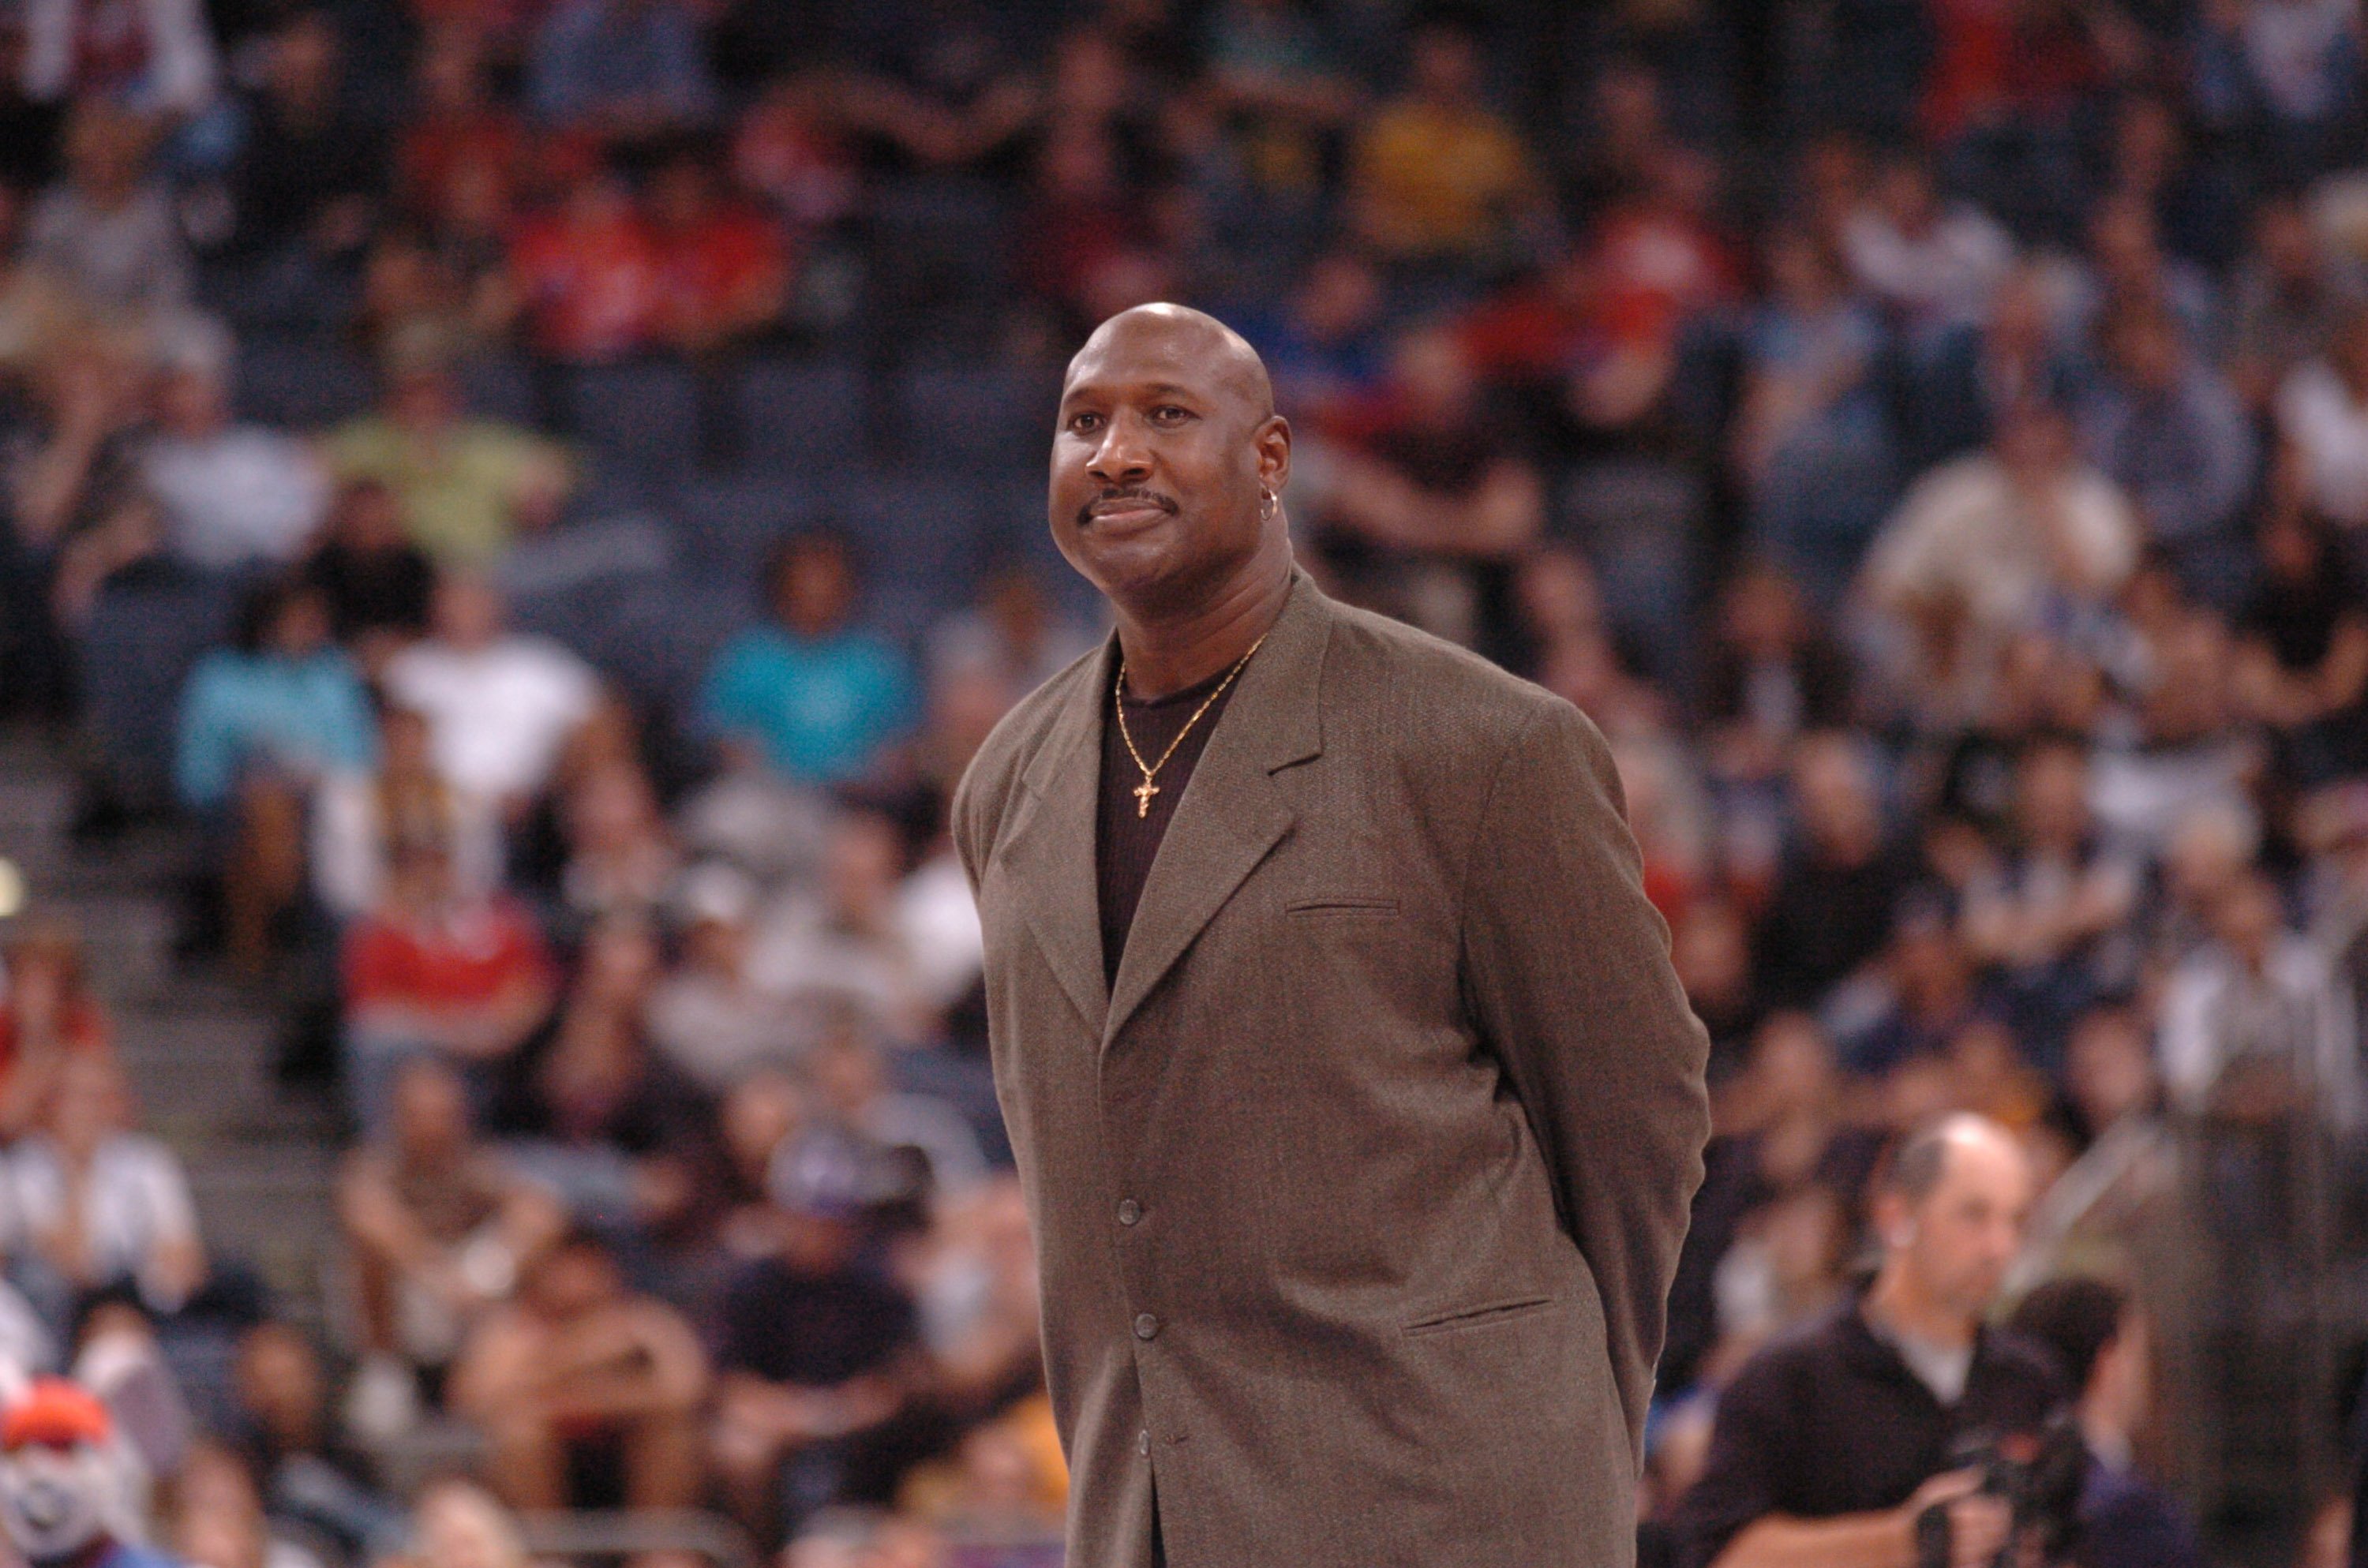 Darryl Dawkins gets introduced to the crowd during the NBA Europe Live Tour presented by EA Sports on October 10, 2006